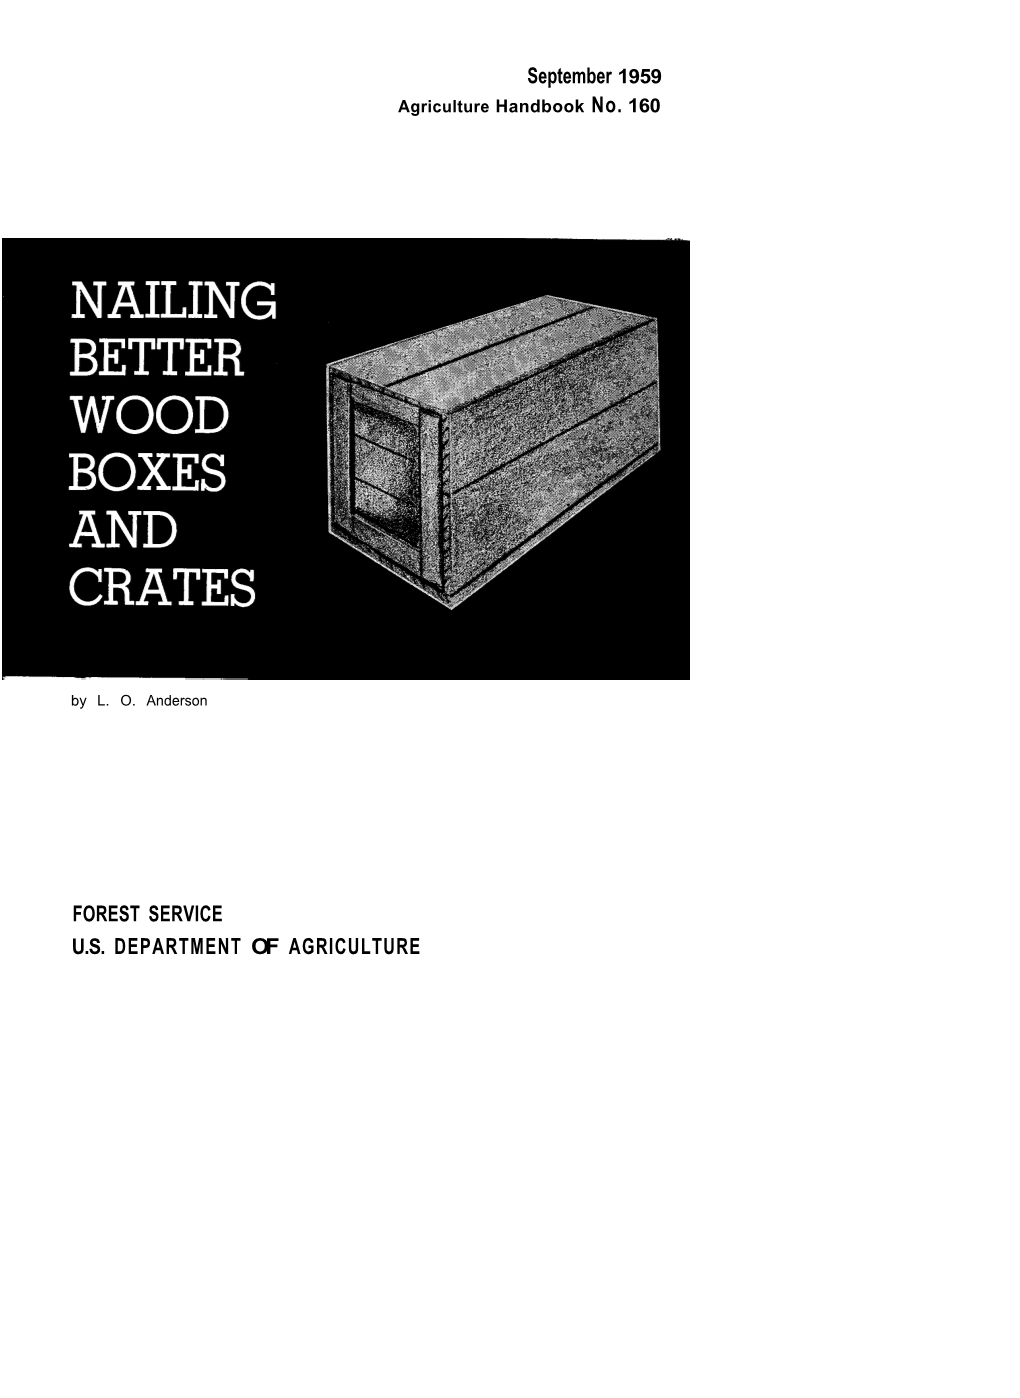 Nailing Better Wood Boxes and Crates